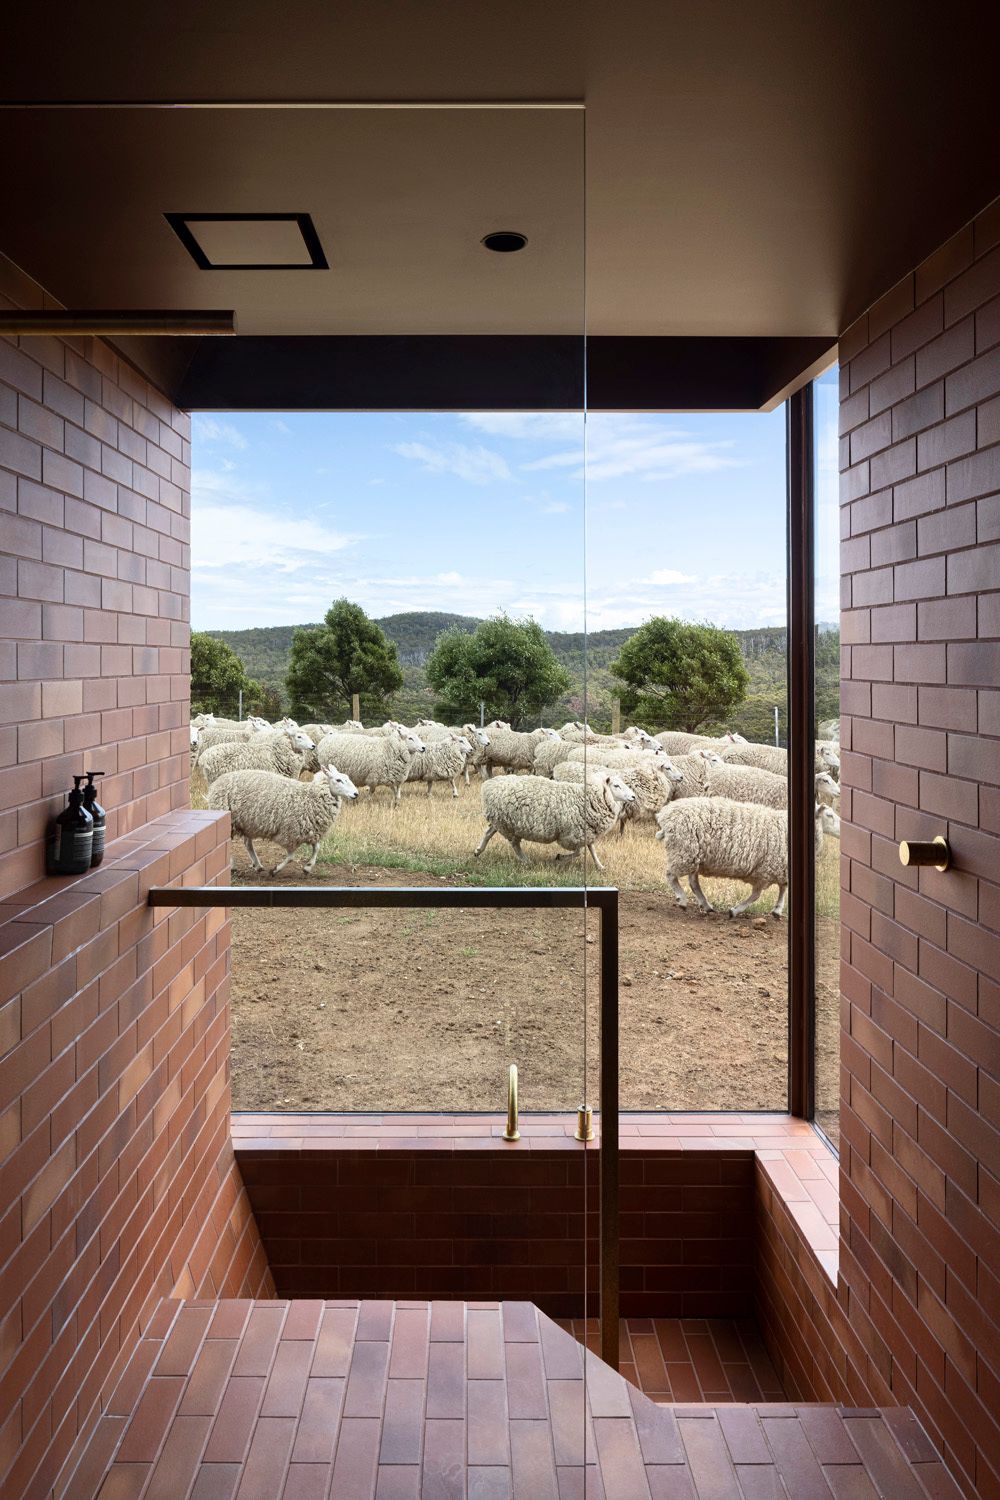 Coopworth by FMD Architects showing a red tiled bathroom with a sunken bath tub that overlooks a rural farm